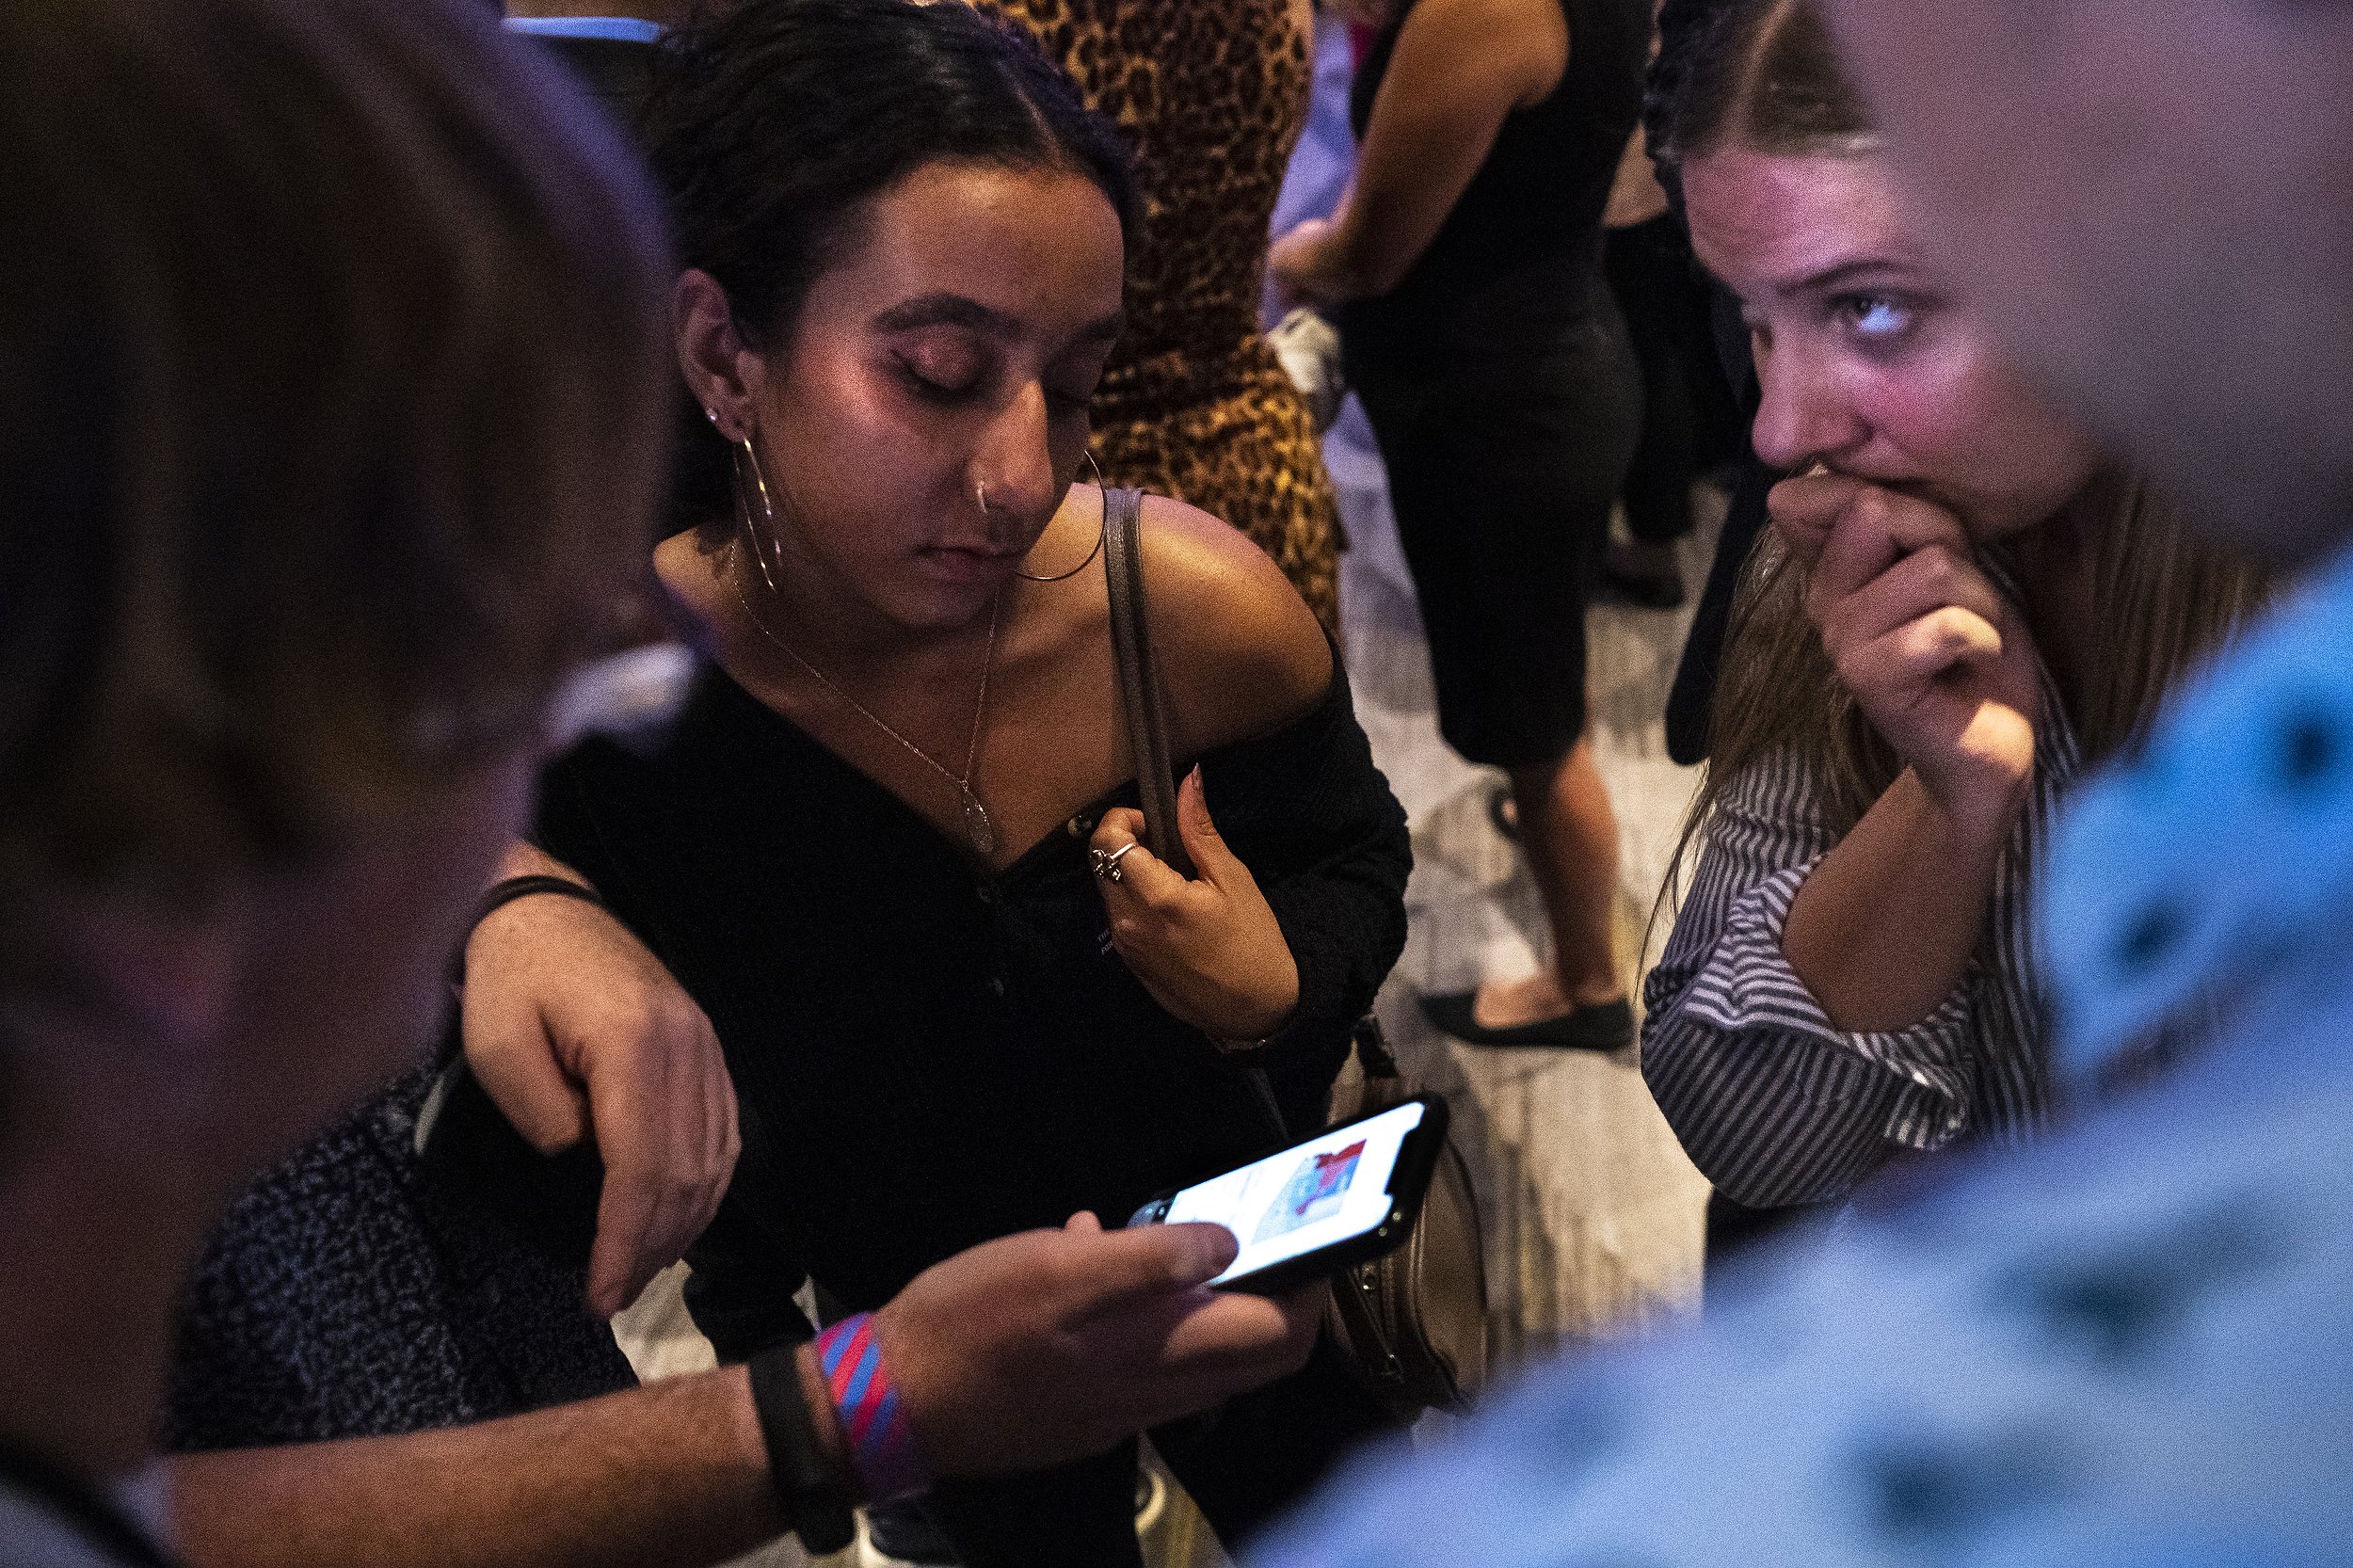  Sahara Sajjadi, at center, and Kaliee Heyman, at right, watch as election results come in during a democratic candidates Election Night watch party at the Renaissance Phoenix Downtown Hotel on Tuesday, Nov. 8, 2022, in Phoenix. 